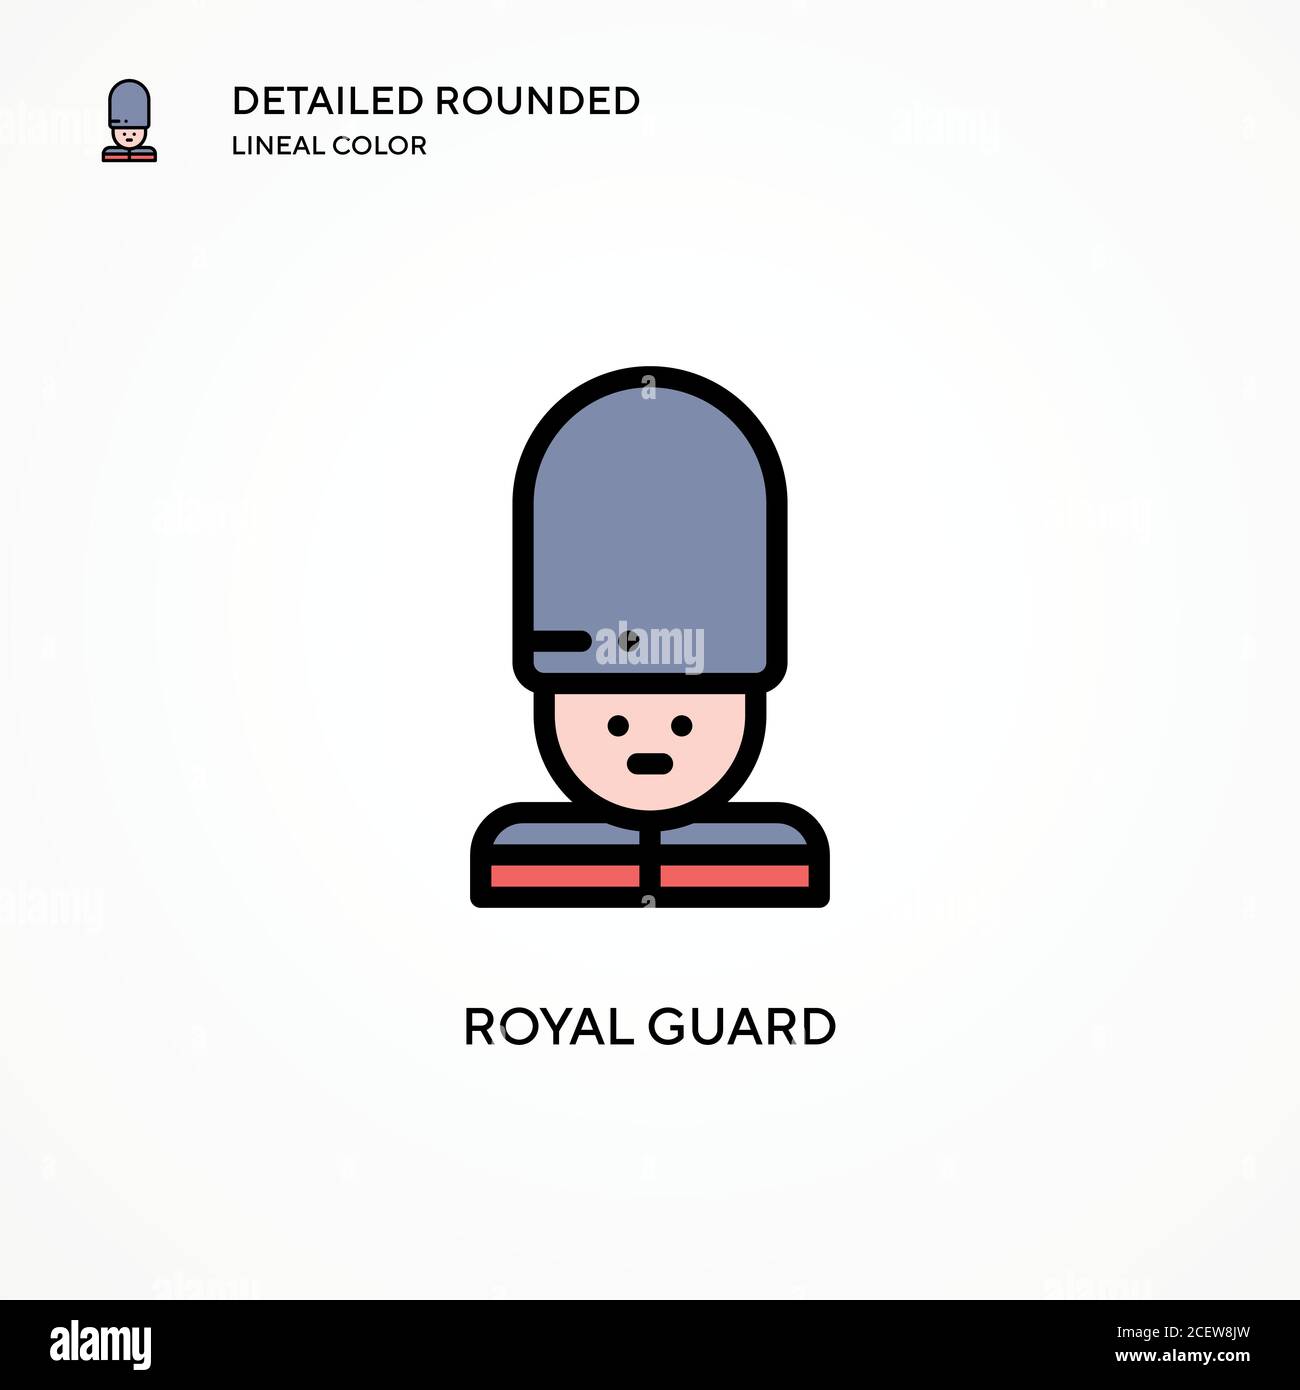 Royal guard vector icon. Modern vector illustration concepts. Easy to edit and customize. Stock Vector